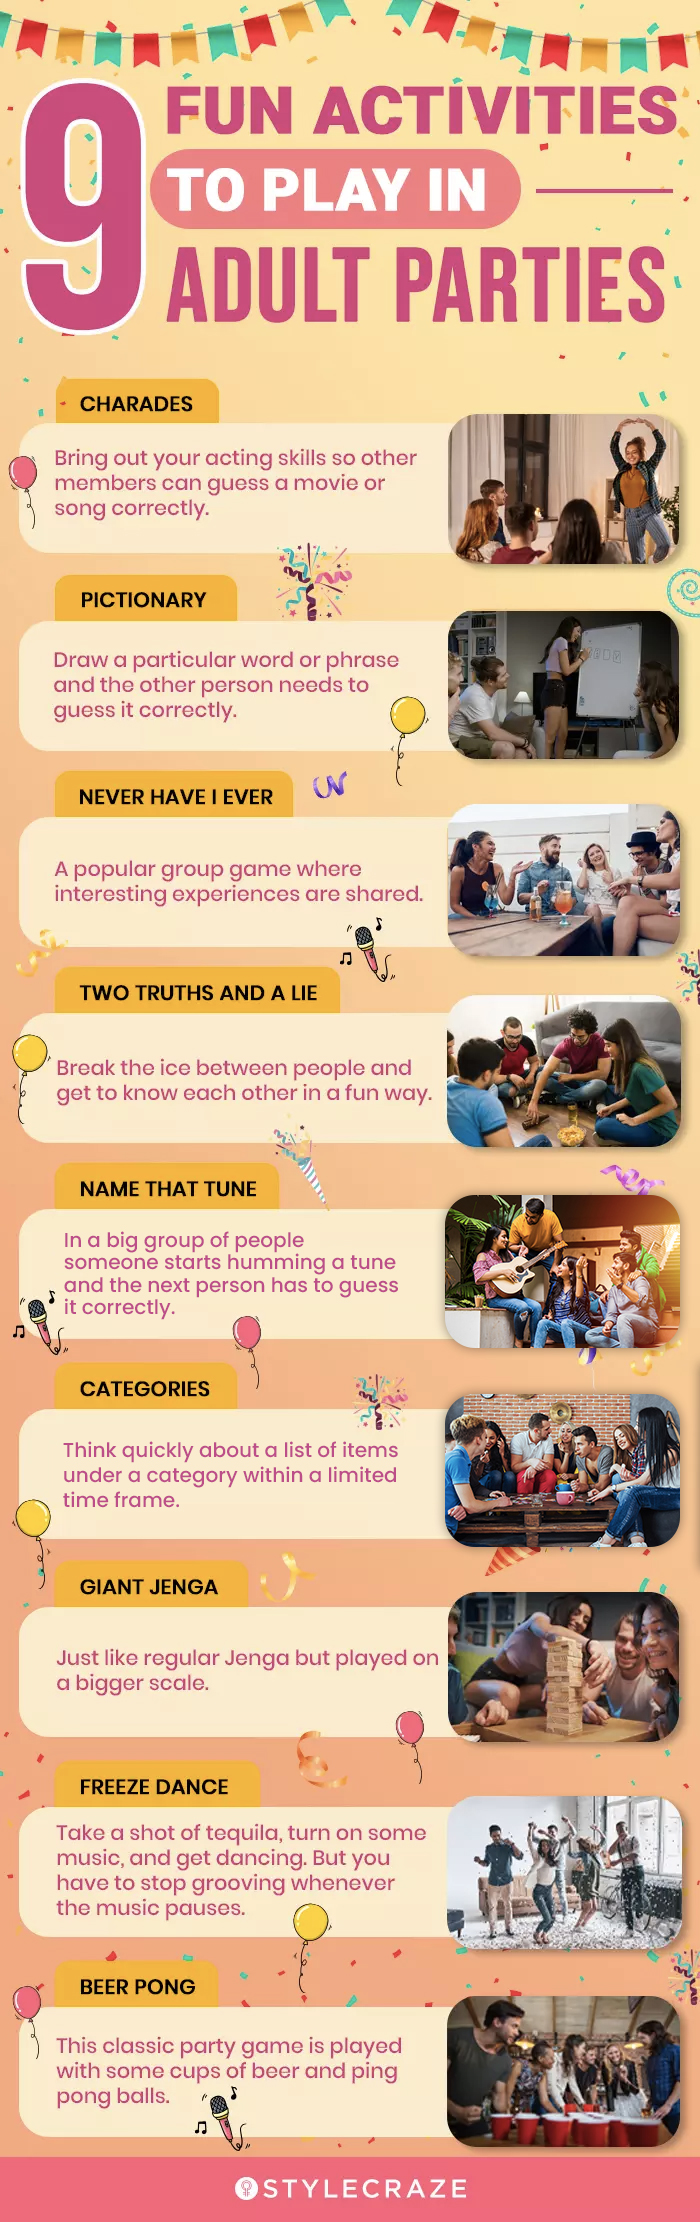 9 fun activities to play in adult parties (infographic)